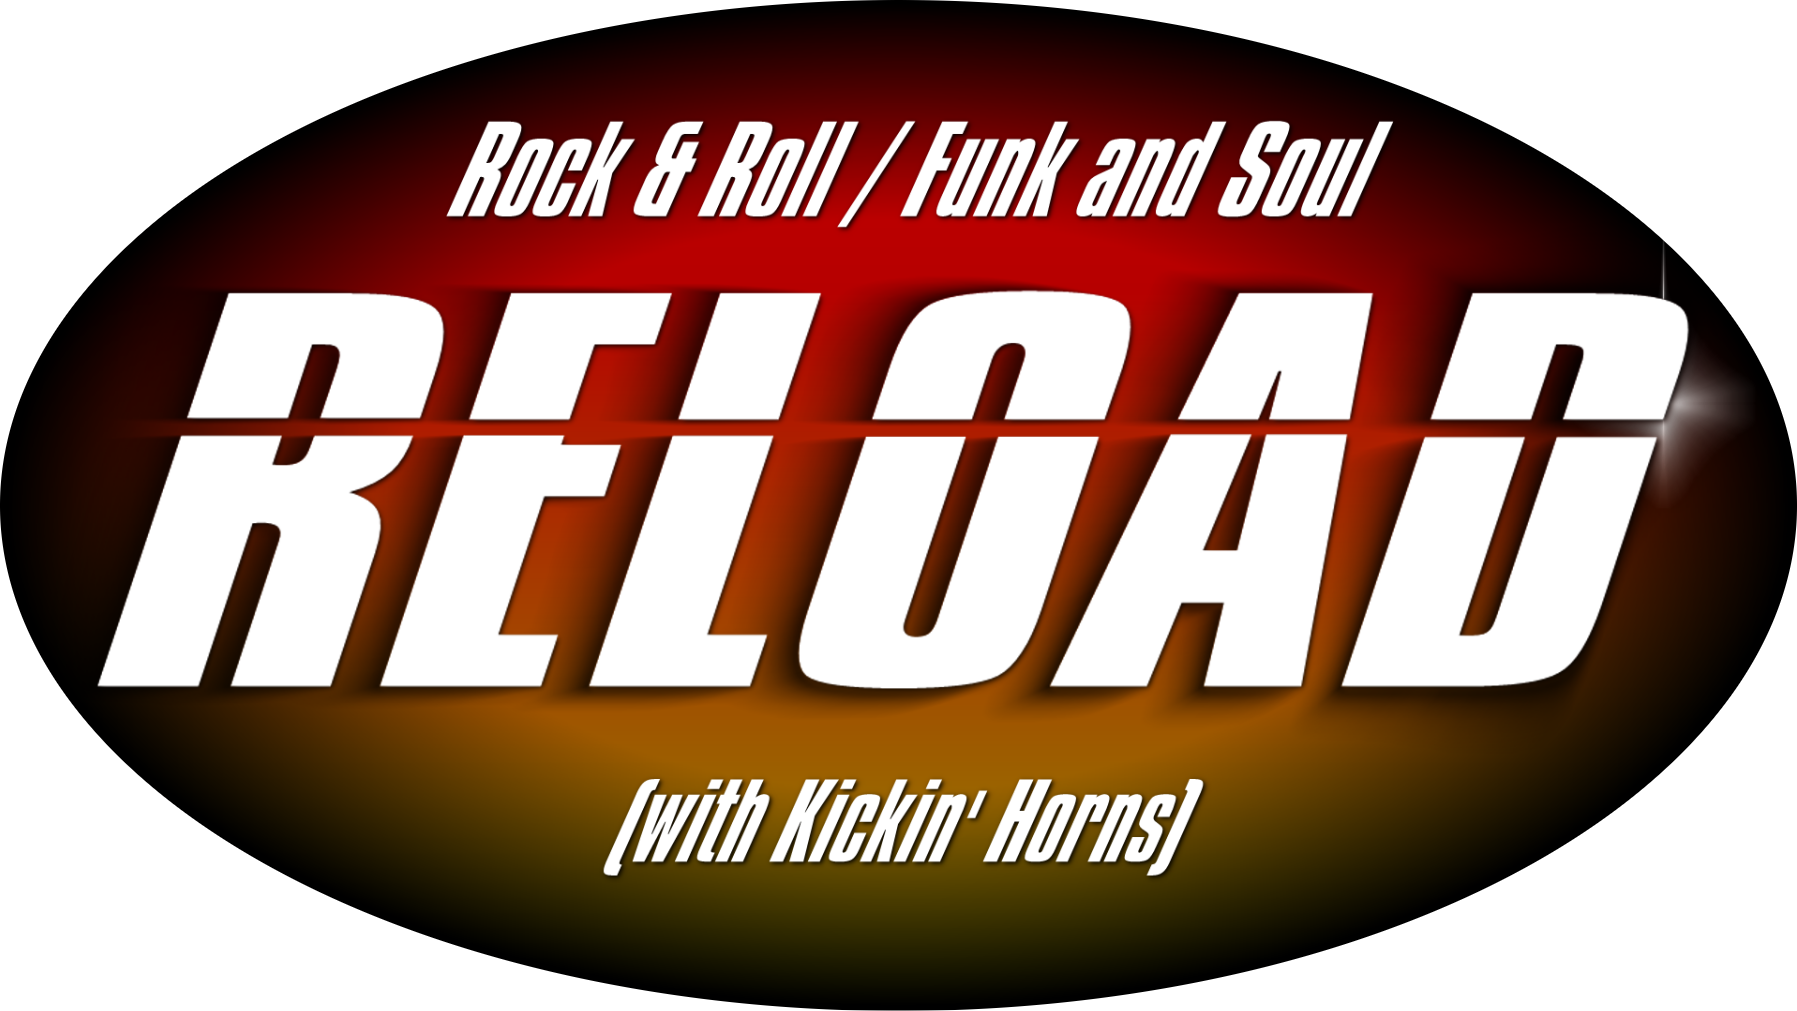 RELOAD - Rock & Roll / Funk and Soul (with Kickin' Horns)